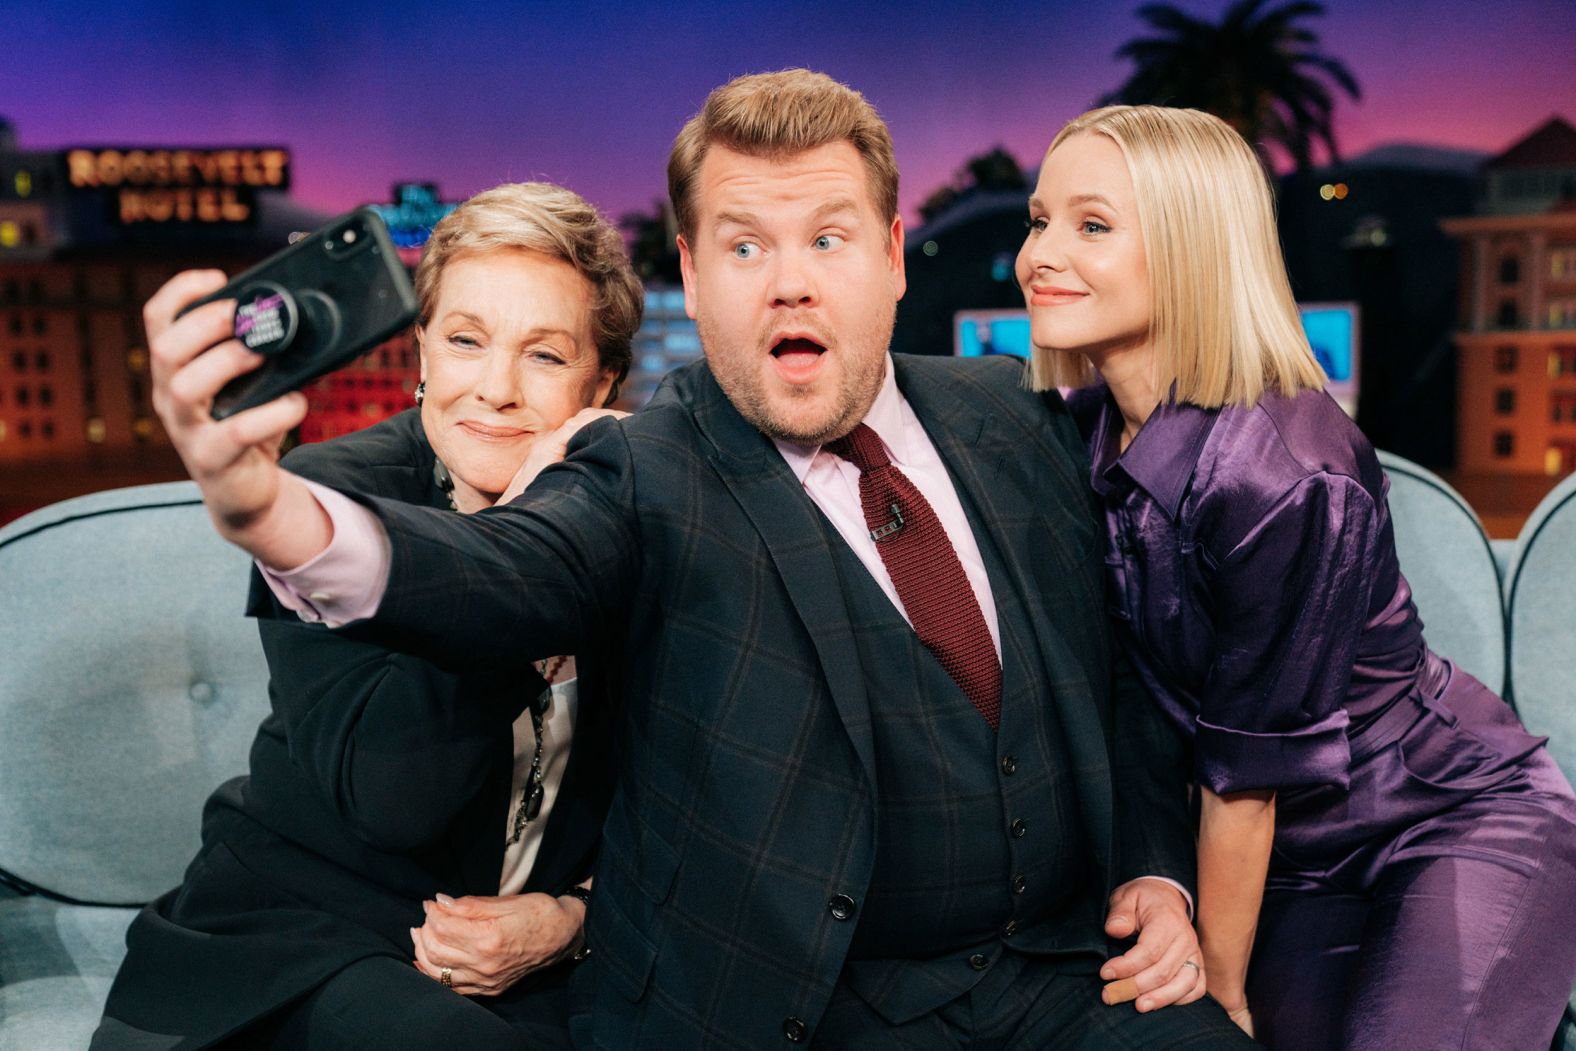 Andrews and Kristen Bell pose for a selfie with late-night host James Corden in 2019.